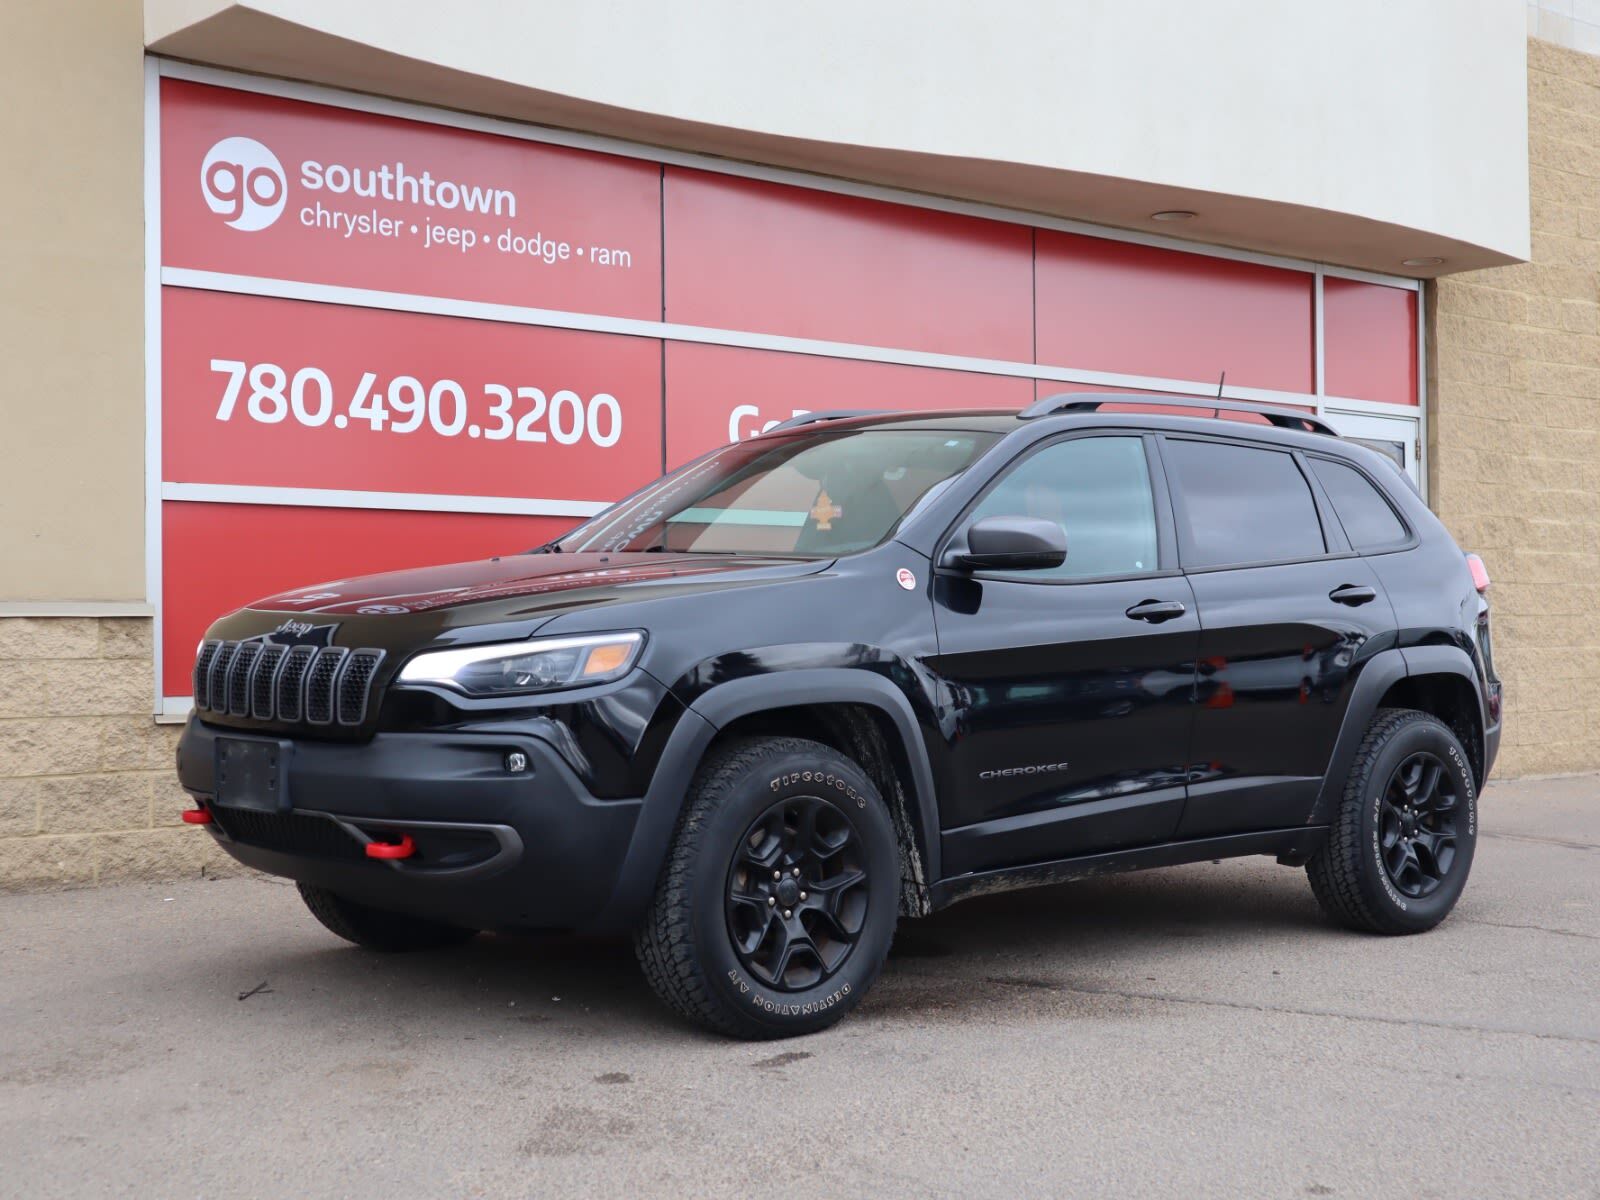 2019 Jeep Cherokee TRAILHAWK IN DIAMOND BLACK EQUIPPED WITH A 3.2L V6